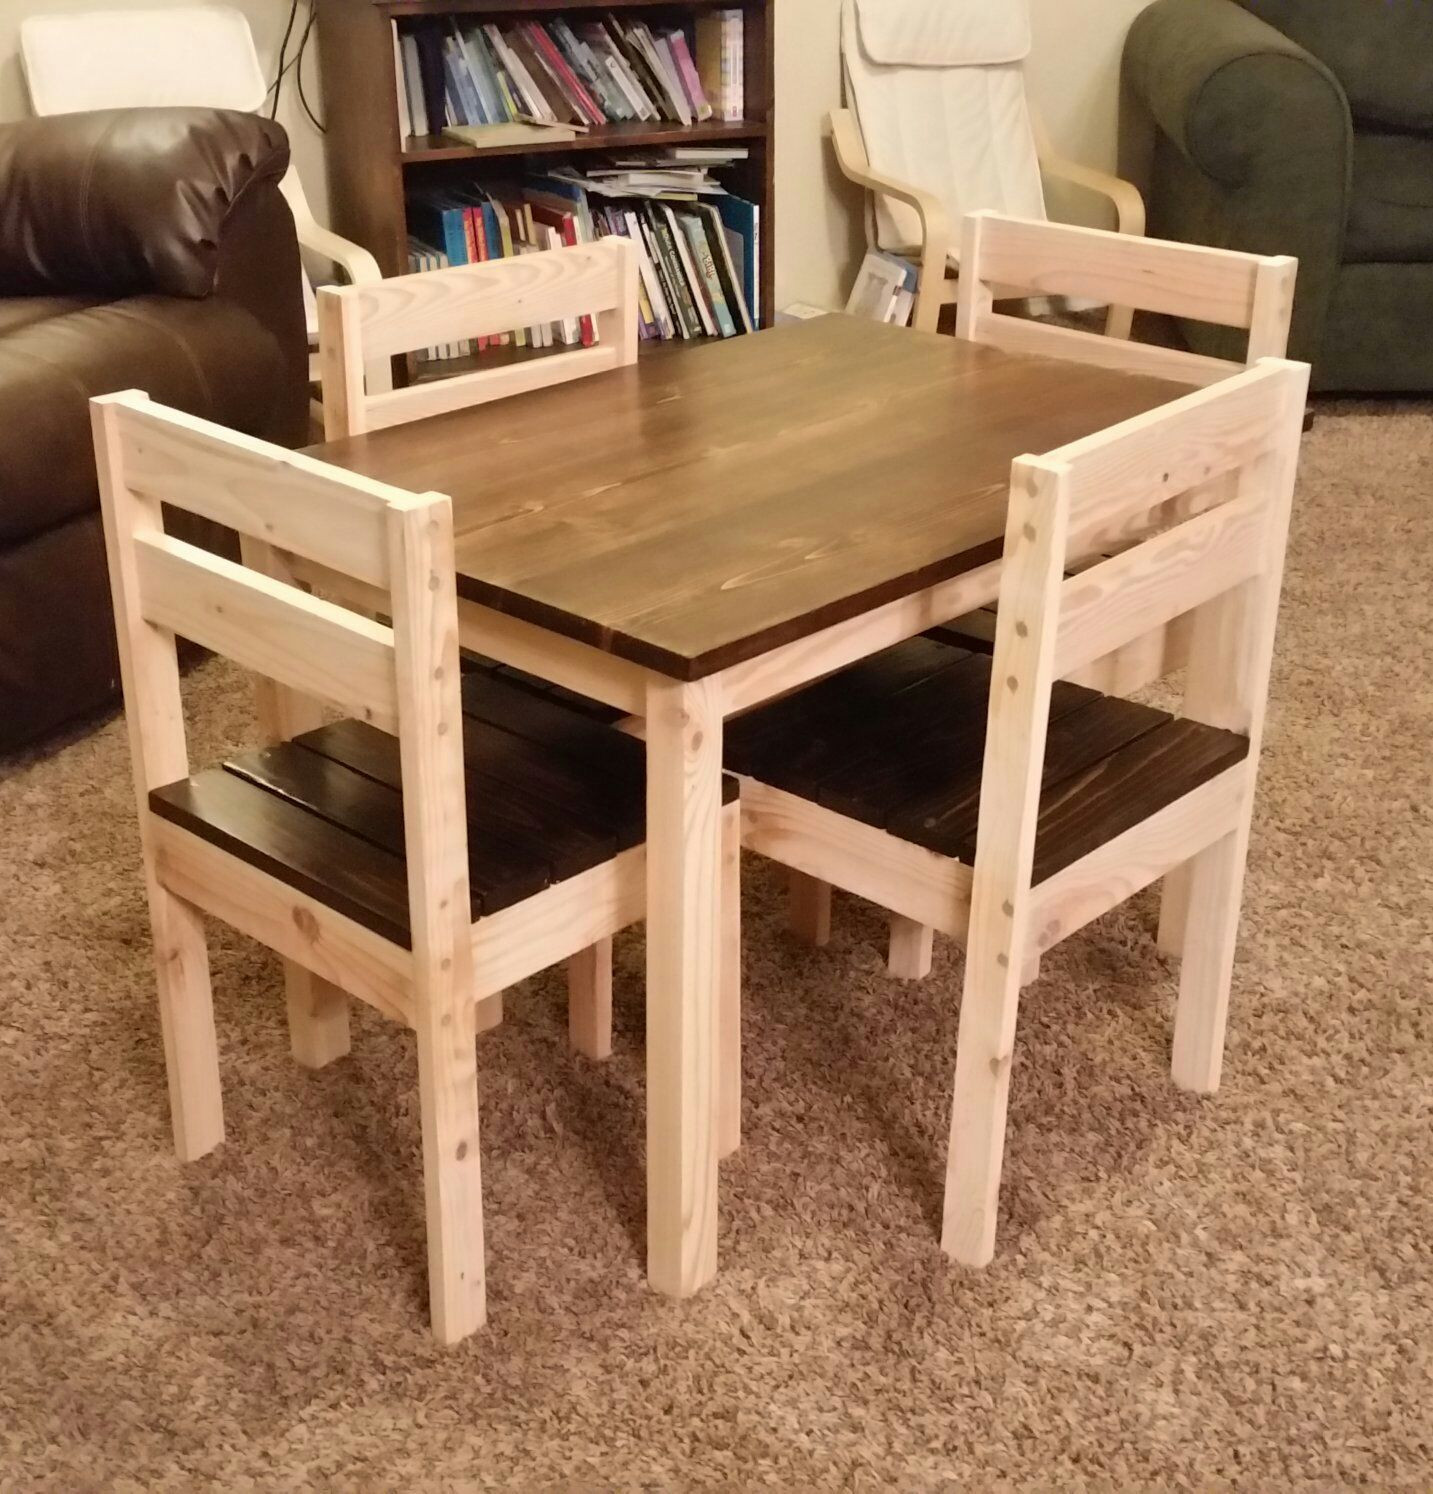 DIY Kids Table
 Kids table and chairs